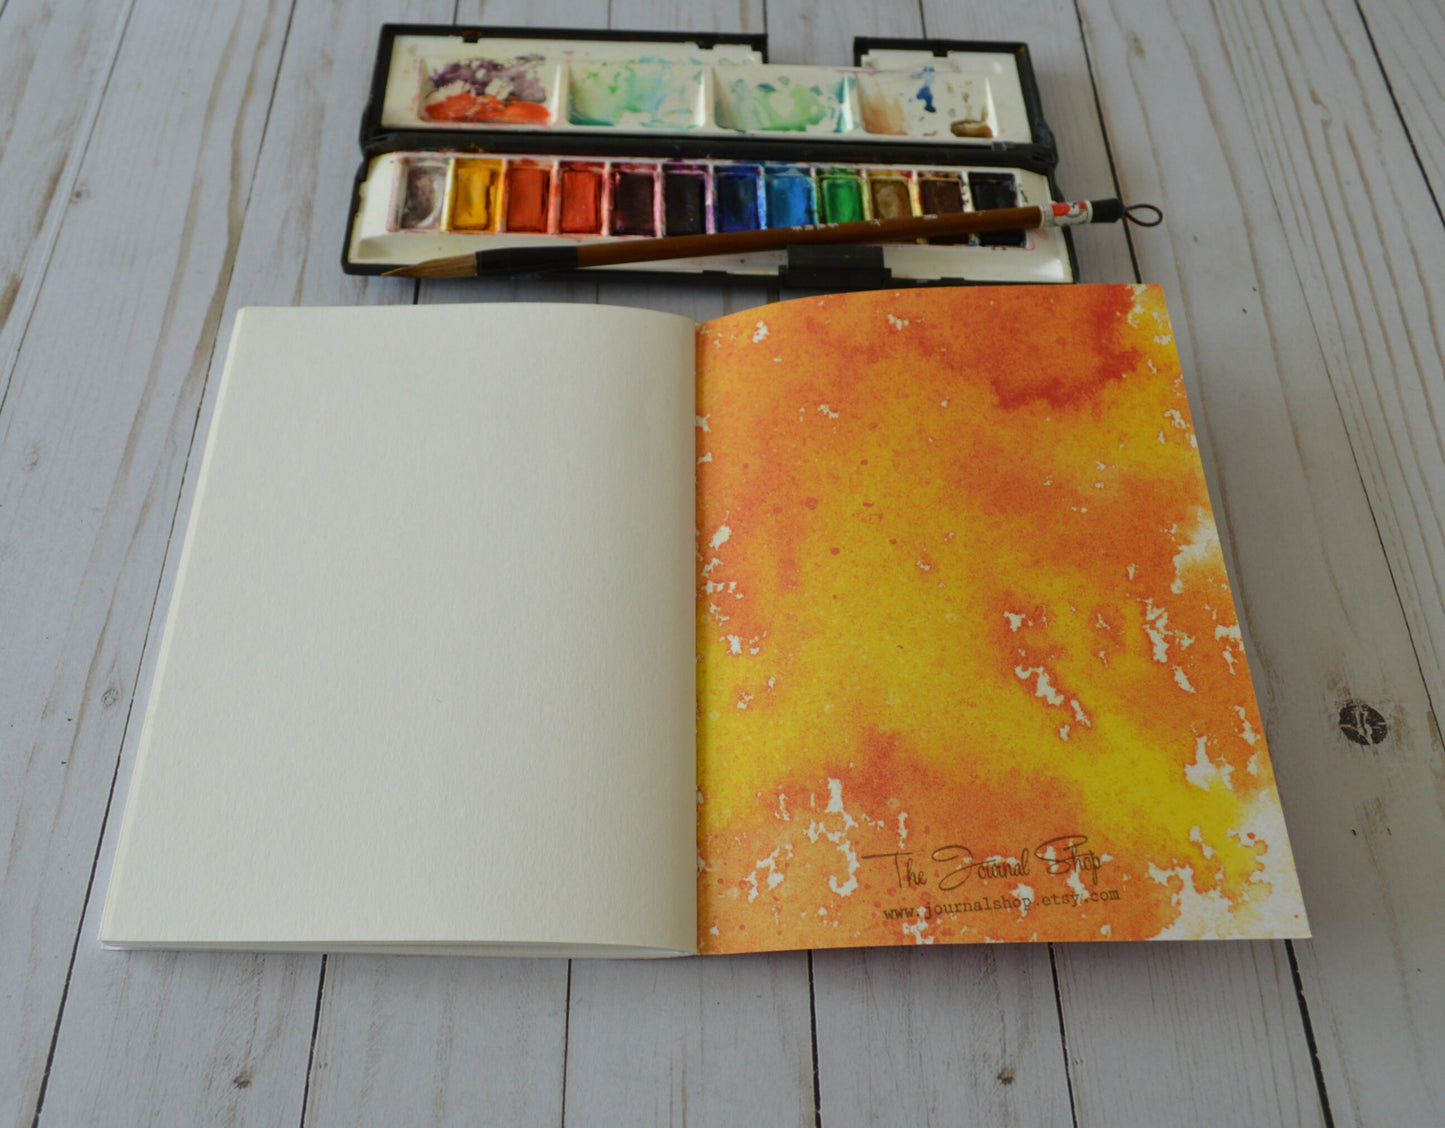 Journal Notebook Insert with foil, Moleskine cahier refill,  A5 Artist sketchbook lay flat with 40 pages 190gsm  Fabriano watercolor paper